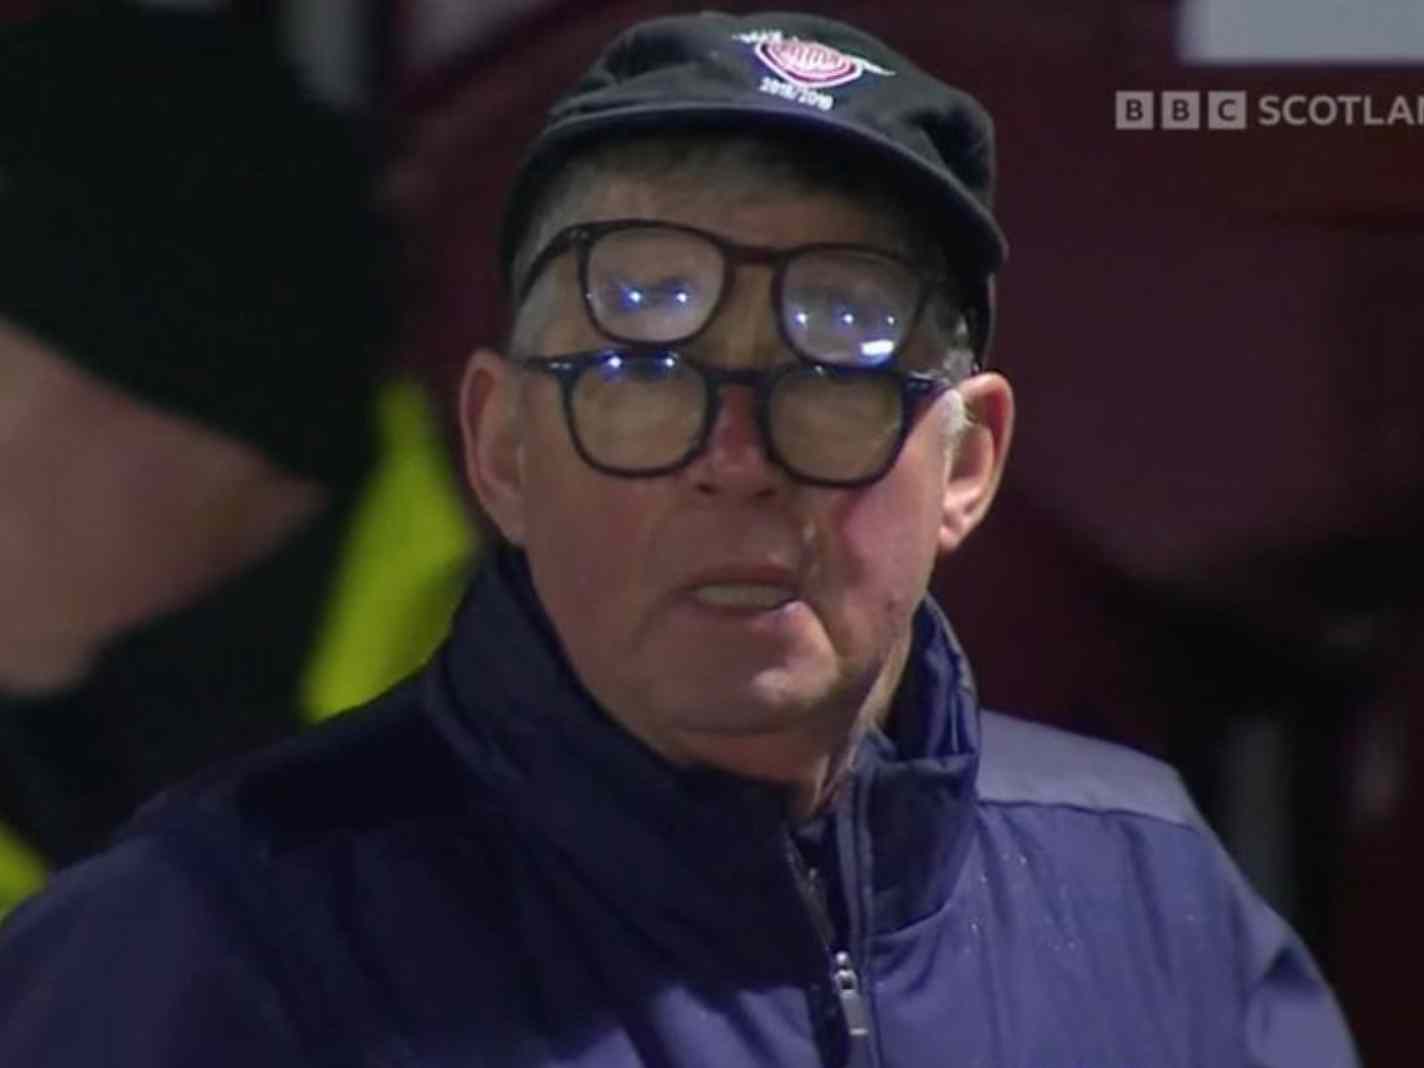 See Arbroath Coach John Young Rock Double Glasses For A Unique Look